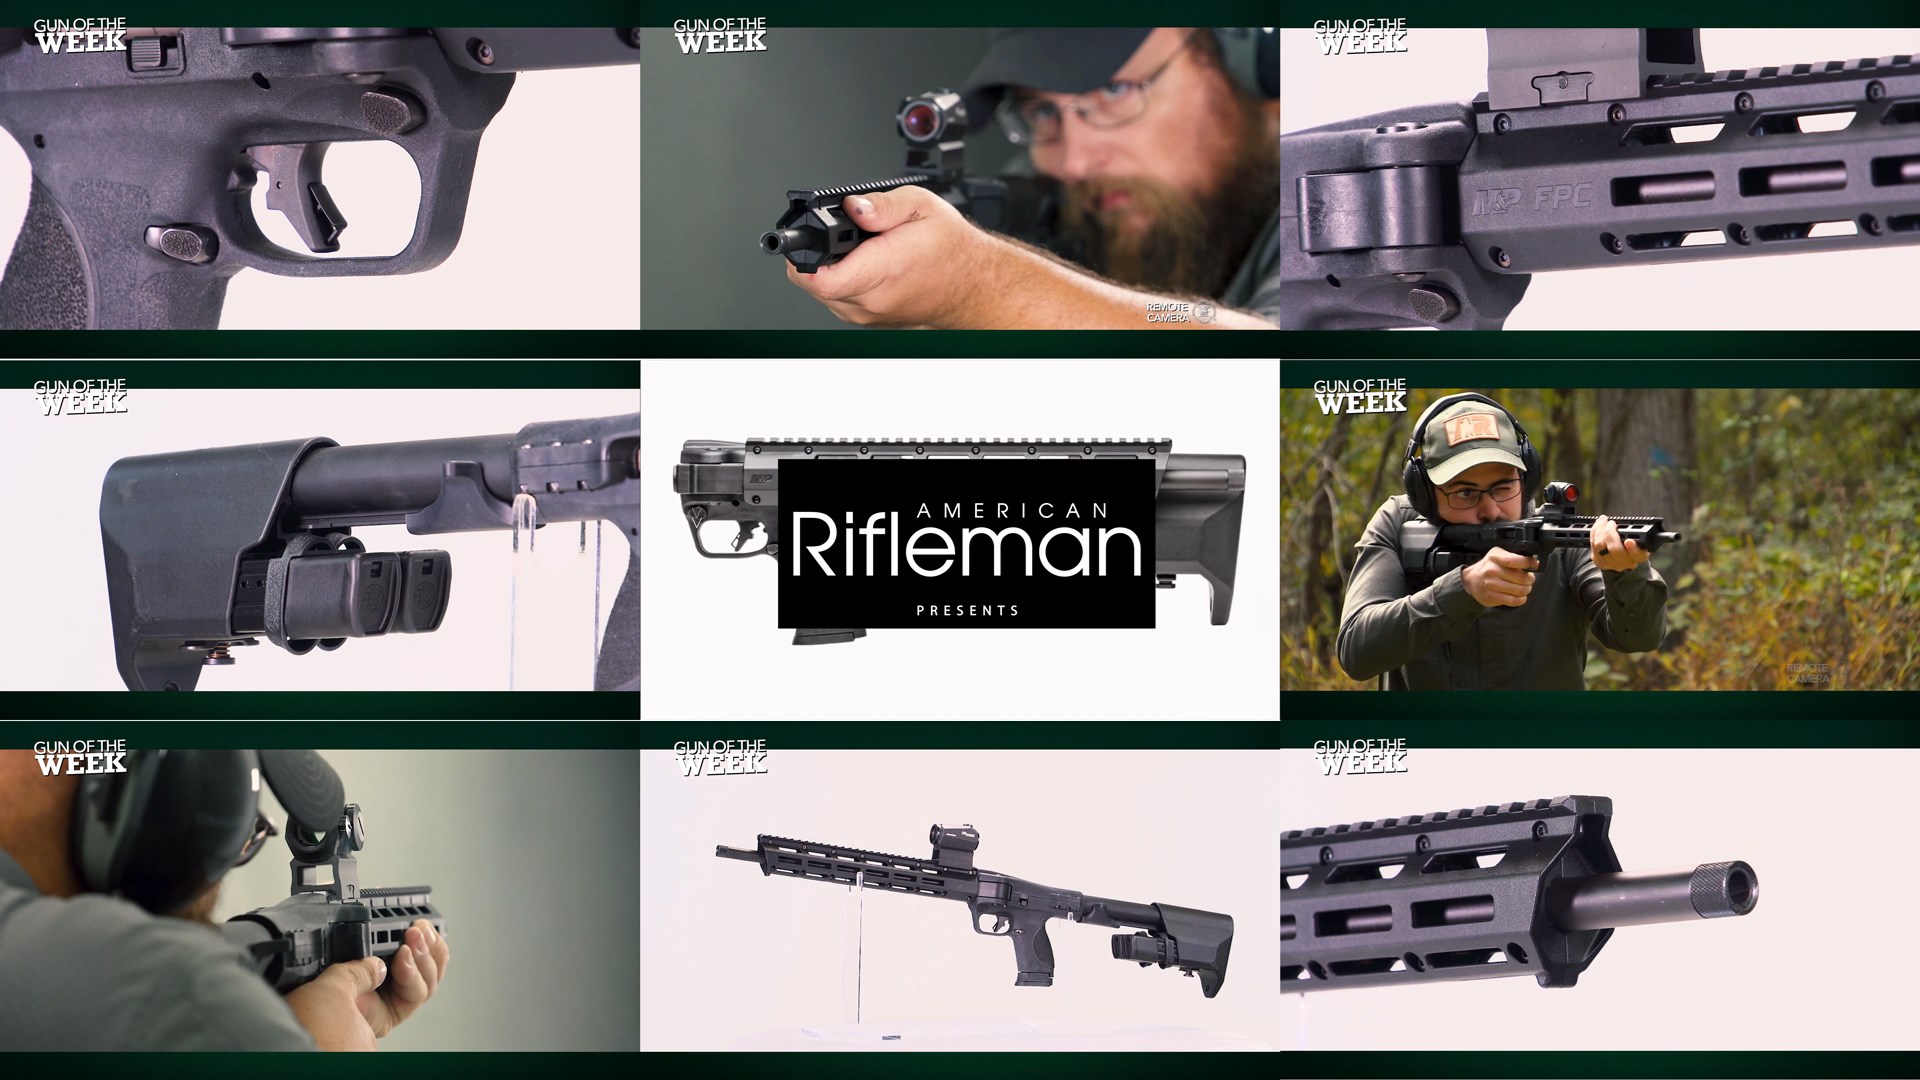 AMERICAN RIFLEMAN PRESENTS montage assemblage tiles 9 images men shooting guns firearm details close-up parts trigger barrel stock fore-end muzzle SIG red-dot